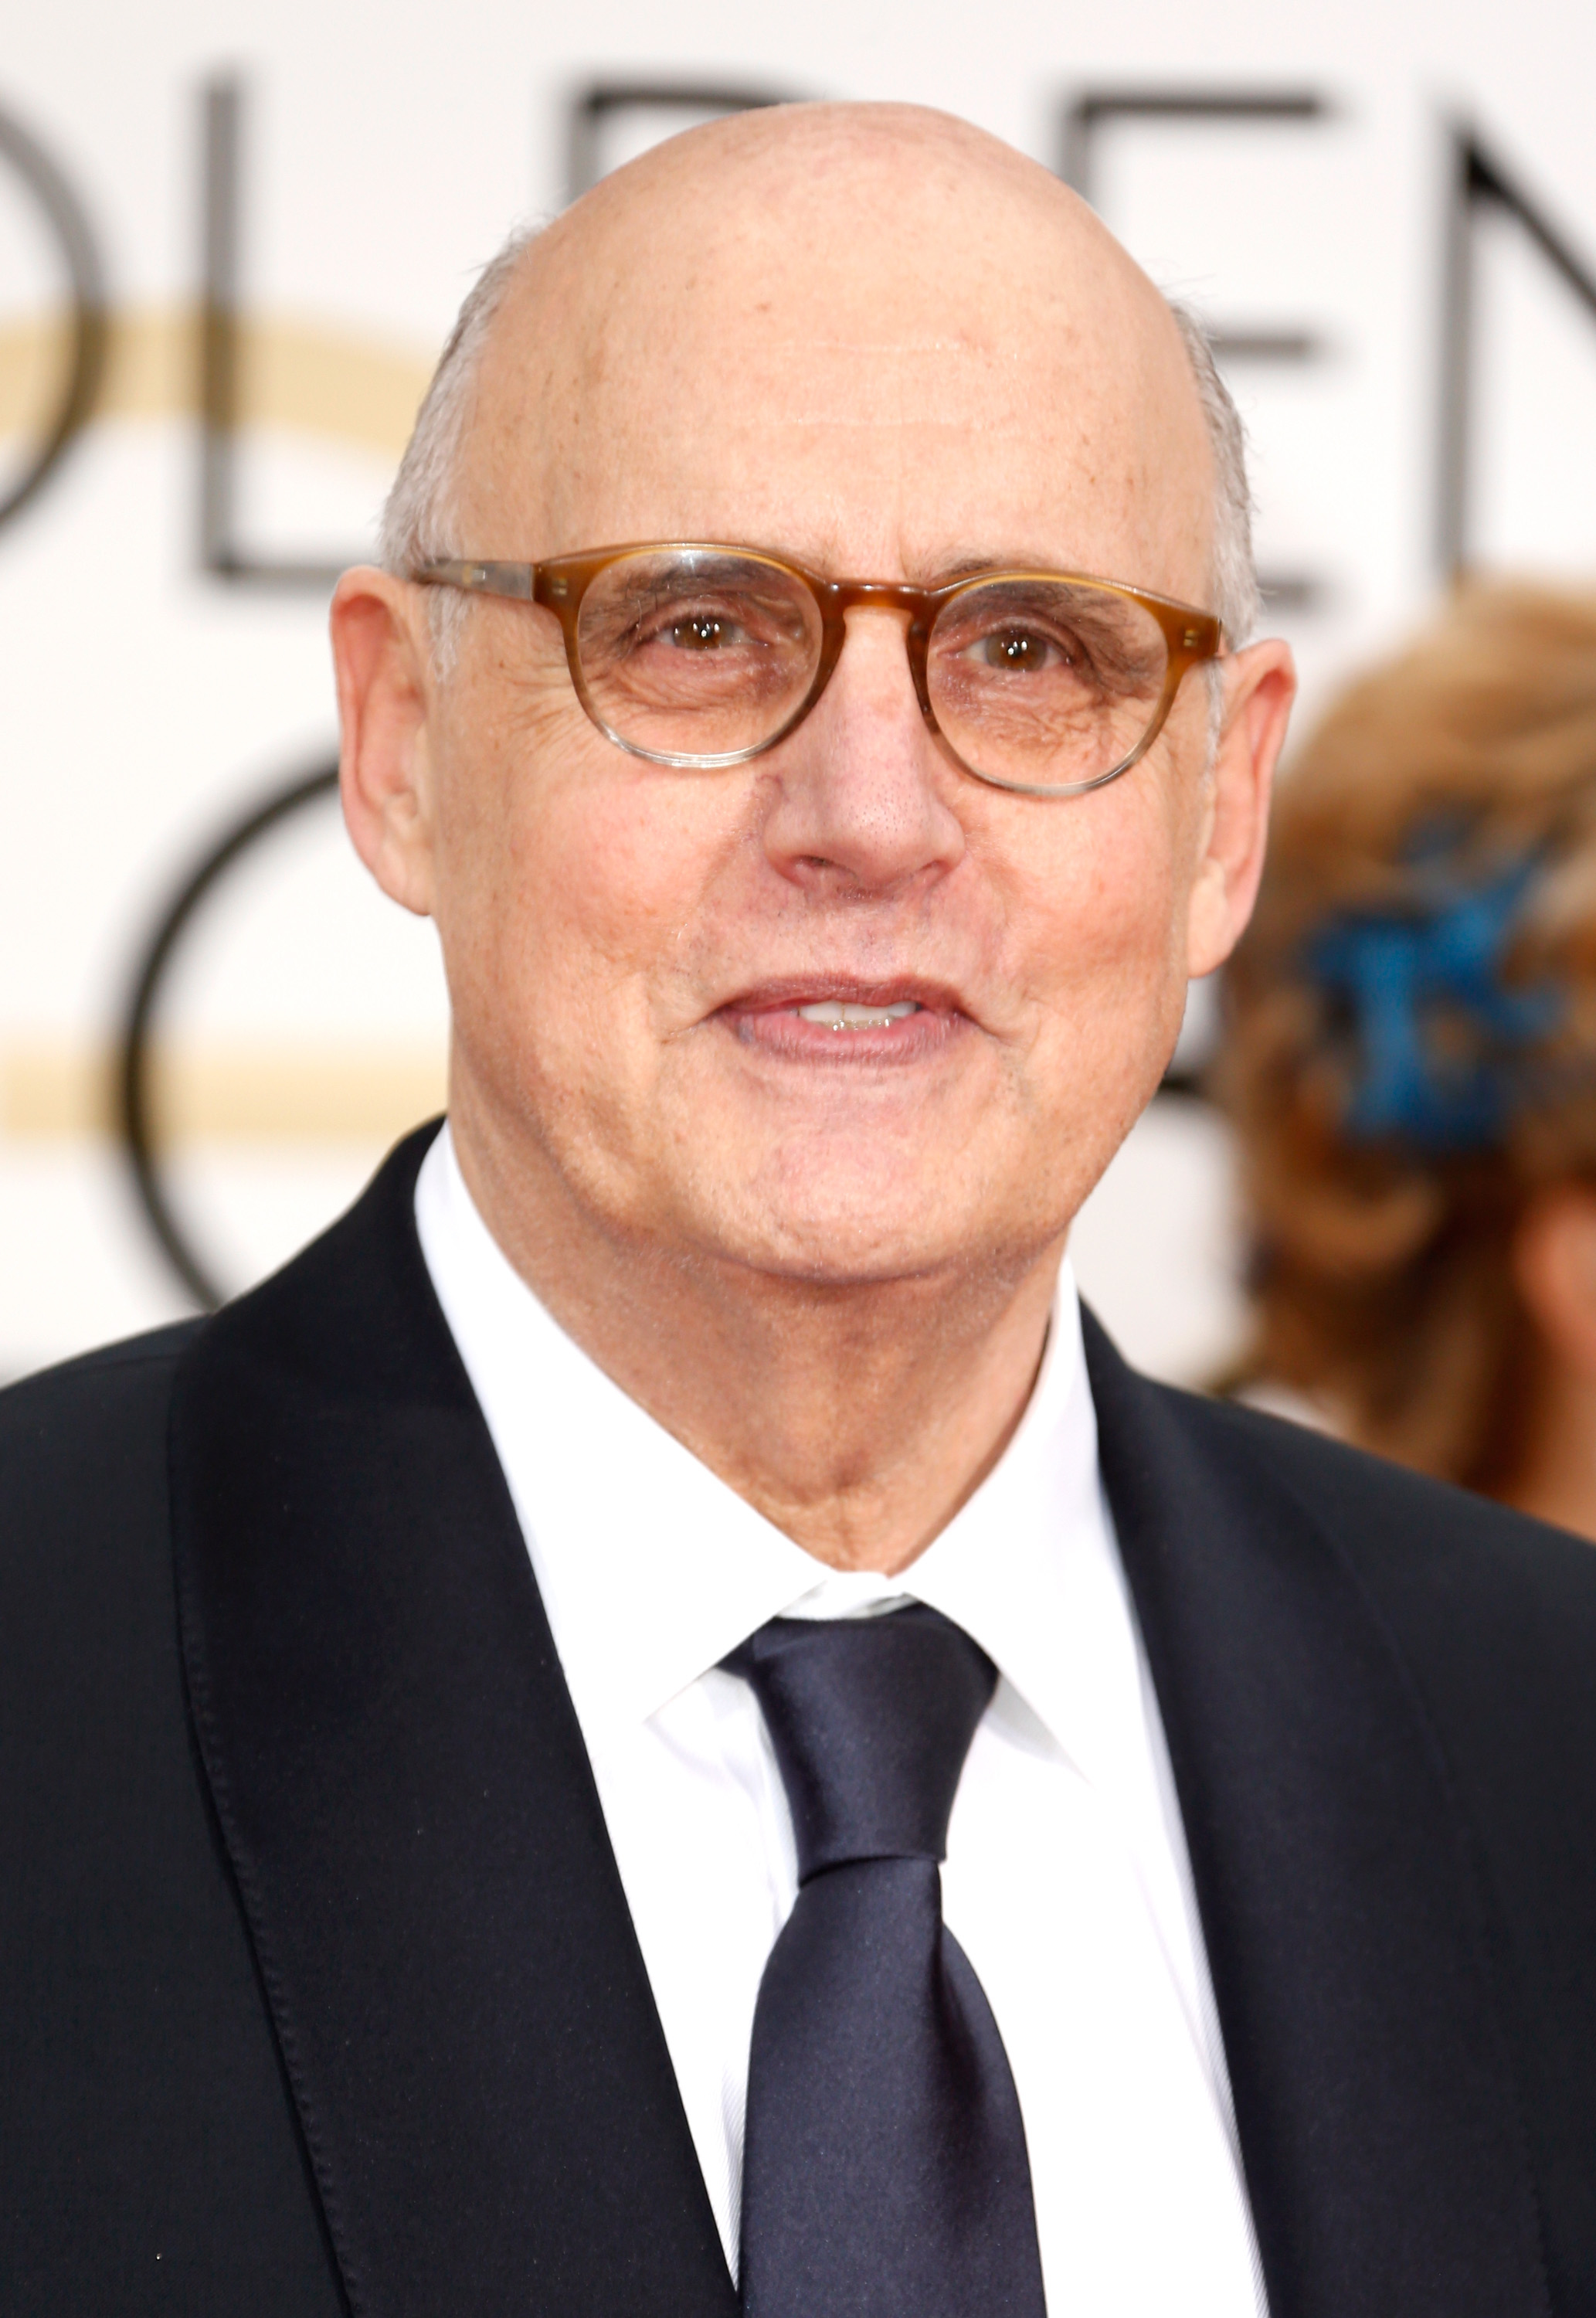 Jeffrey Tambor attends the 72nd Annual Golden Globe Awards at The Beverly Hilton Hotel on Jan. 11, 2015 in Beverly Hills, Calif.